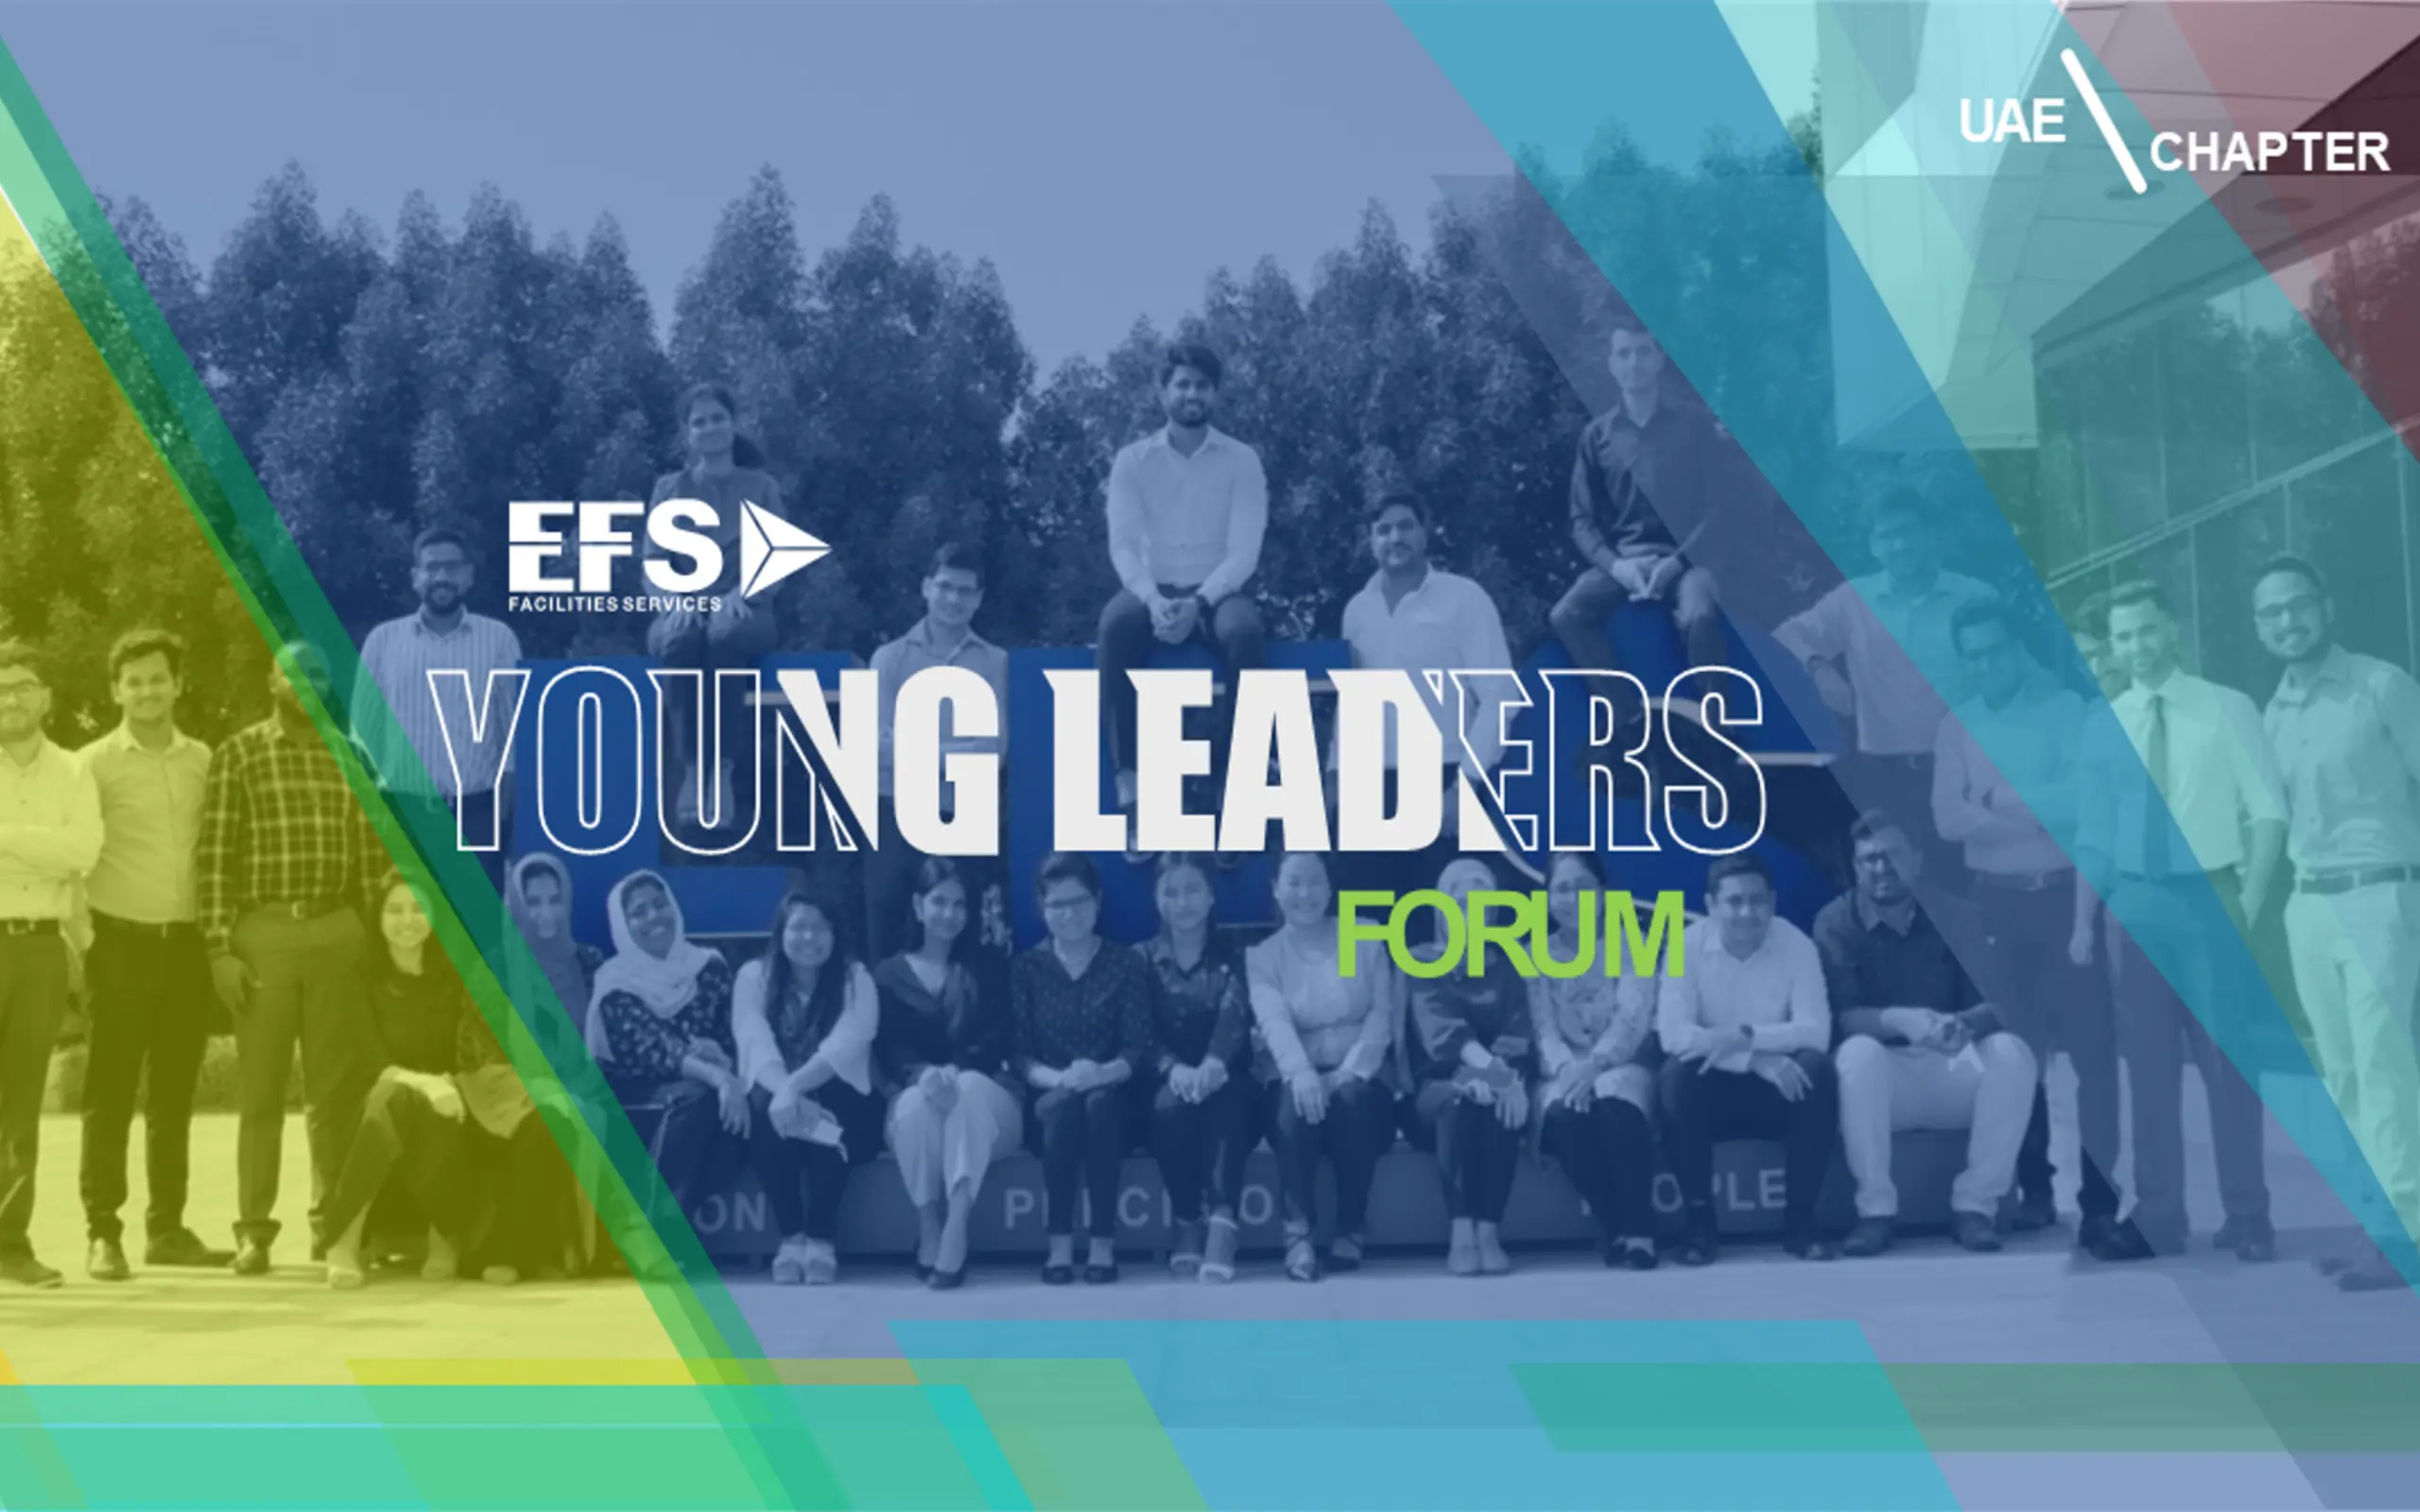 EFS-launches-the-Young-Leaders-forum-an-interactive-leadership-series